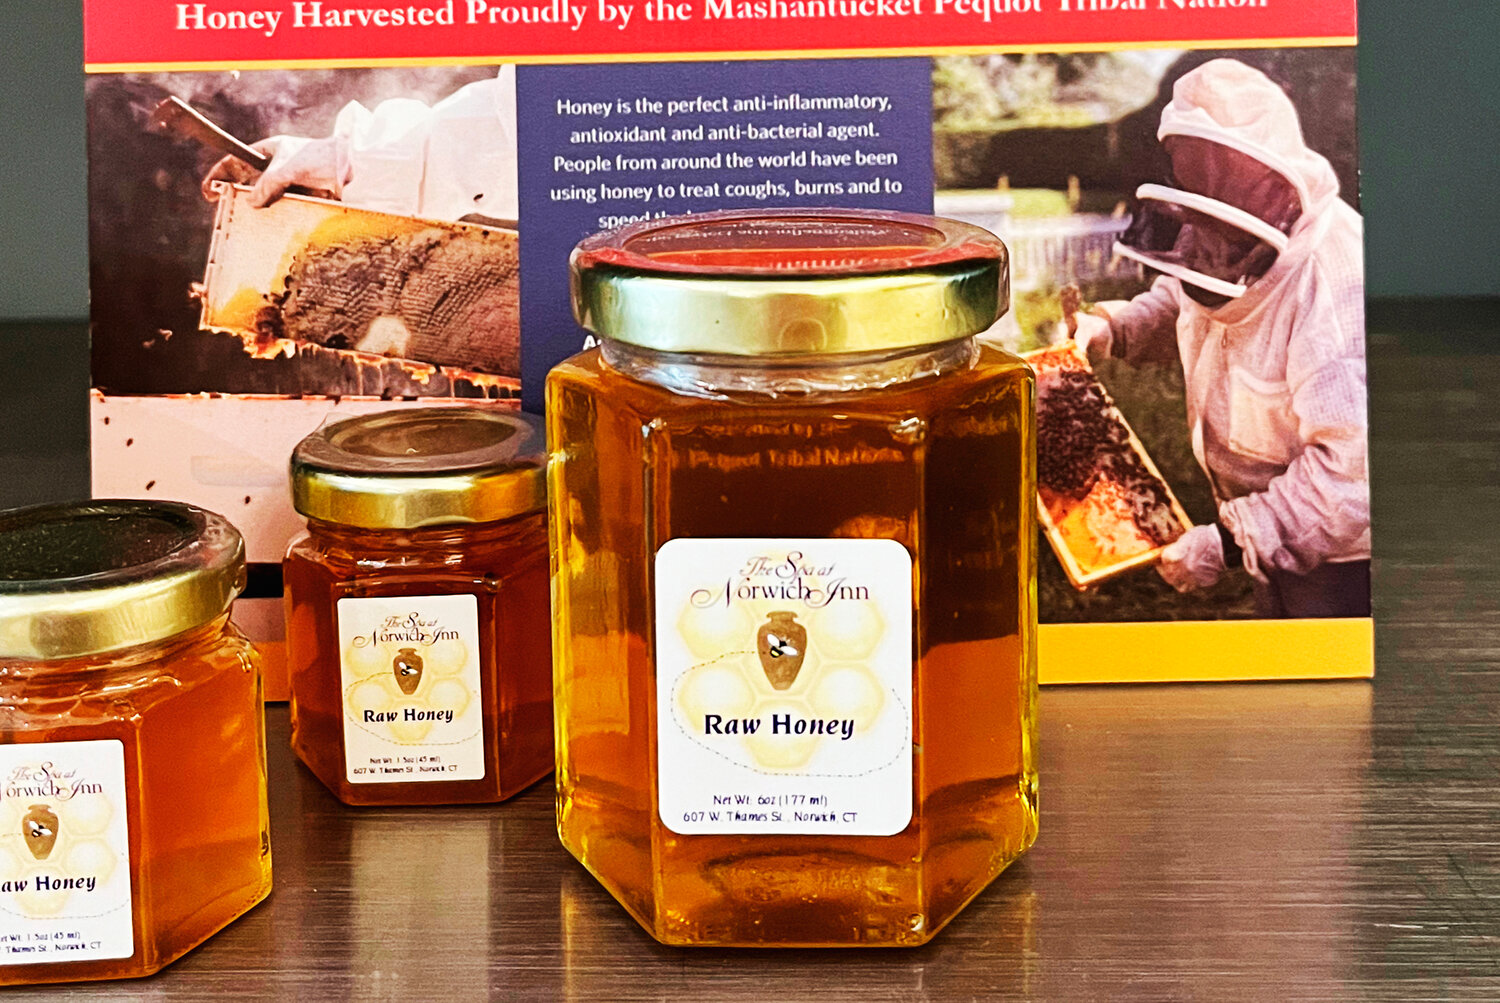 Find the spa’s own honey for sale on site